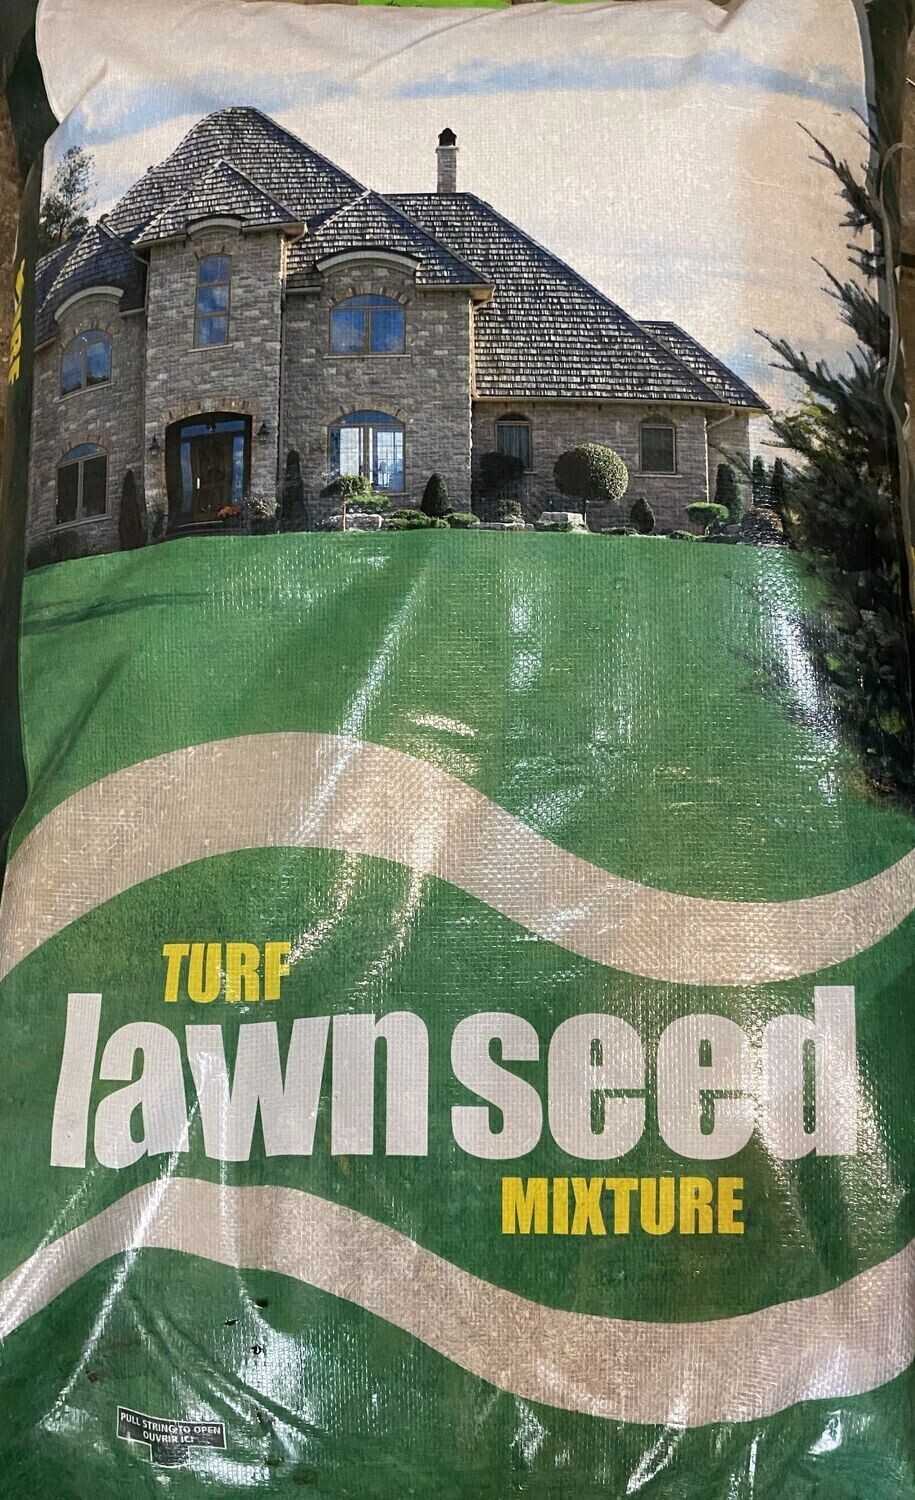 Lawn seed "traditional" 10lb bag